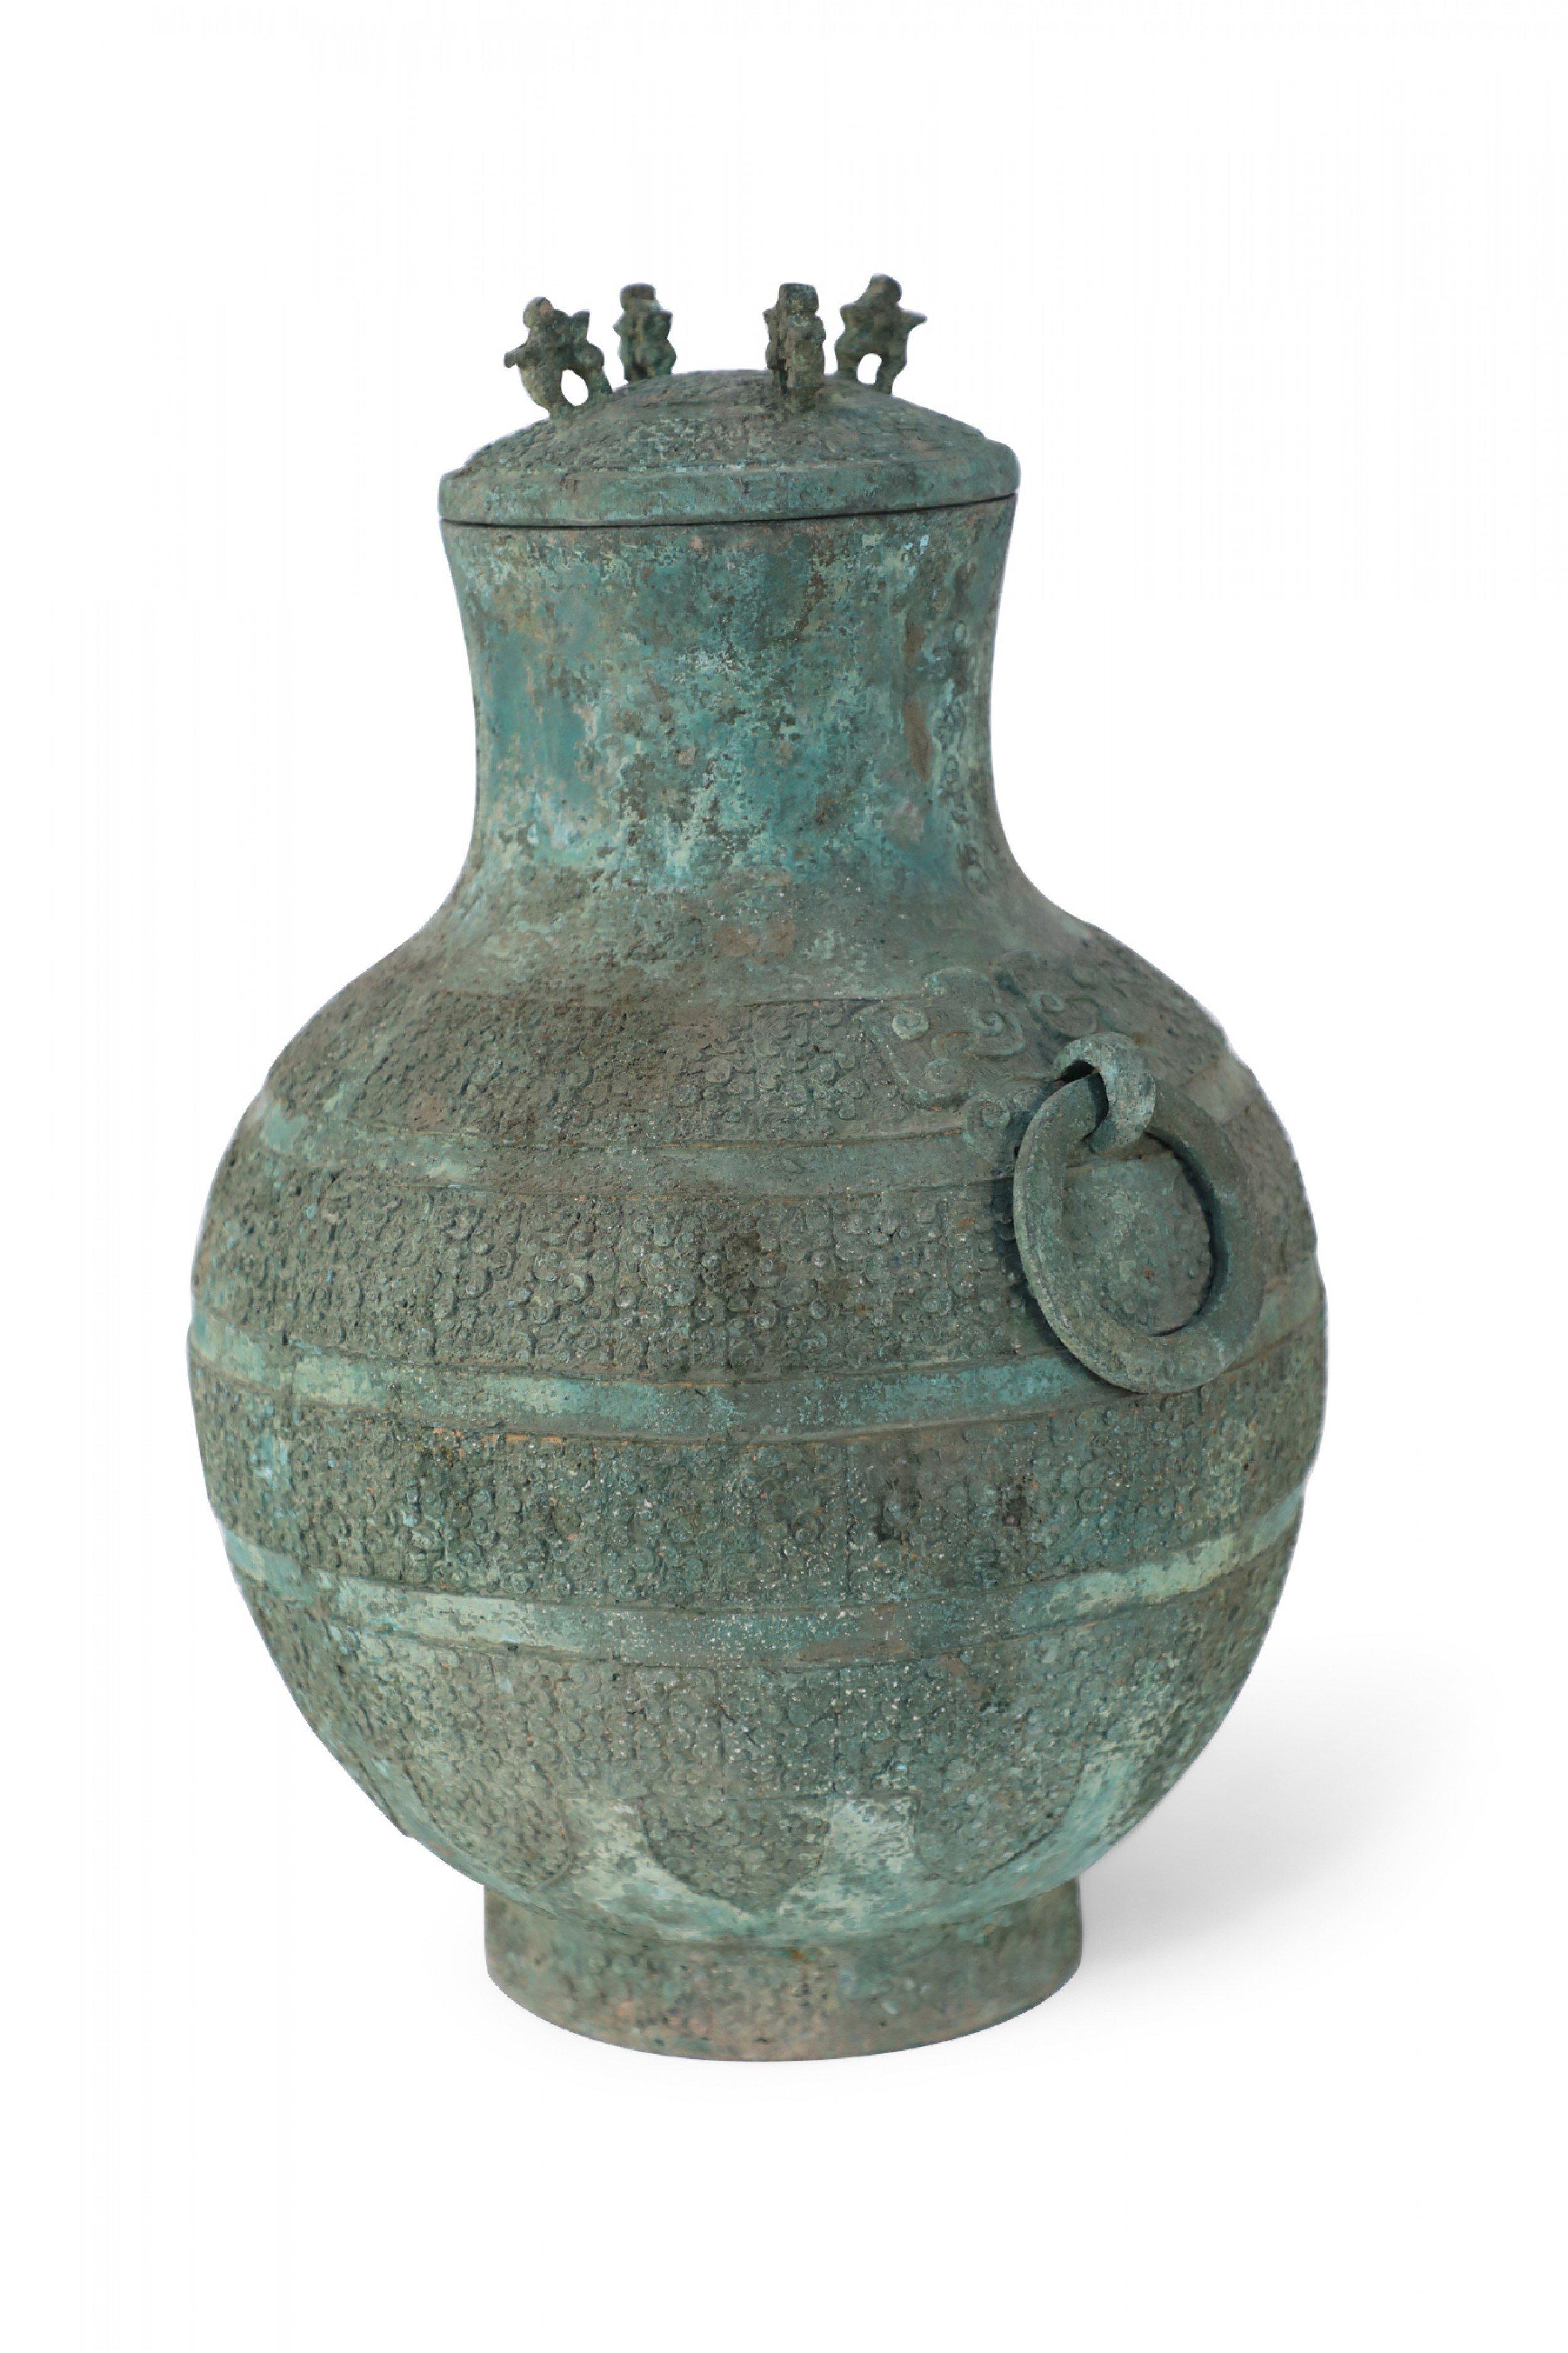 Antique Chinese Han Dynasty-style verdigis bronze ritual wine vessel with an archaistic raised banded pattern, a domed lid with zoomorphic-shaped loops, two decorative rings on the sides and a circular foot.